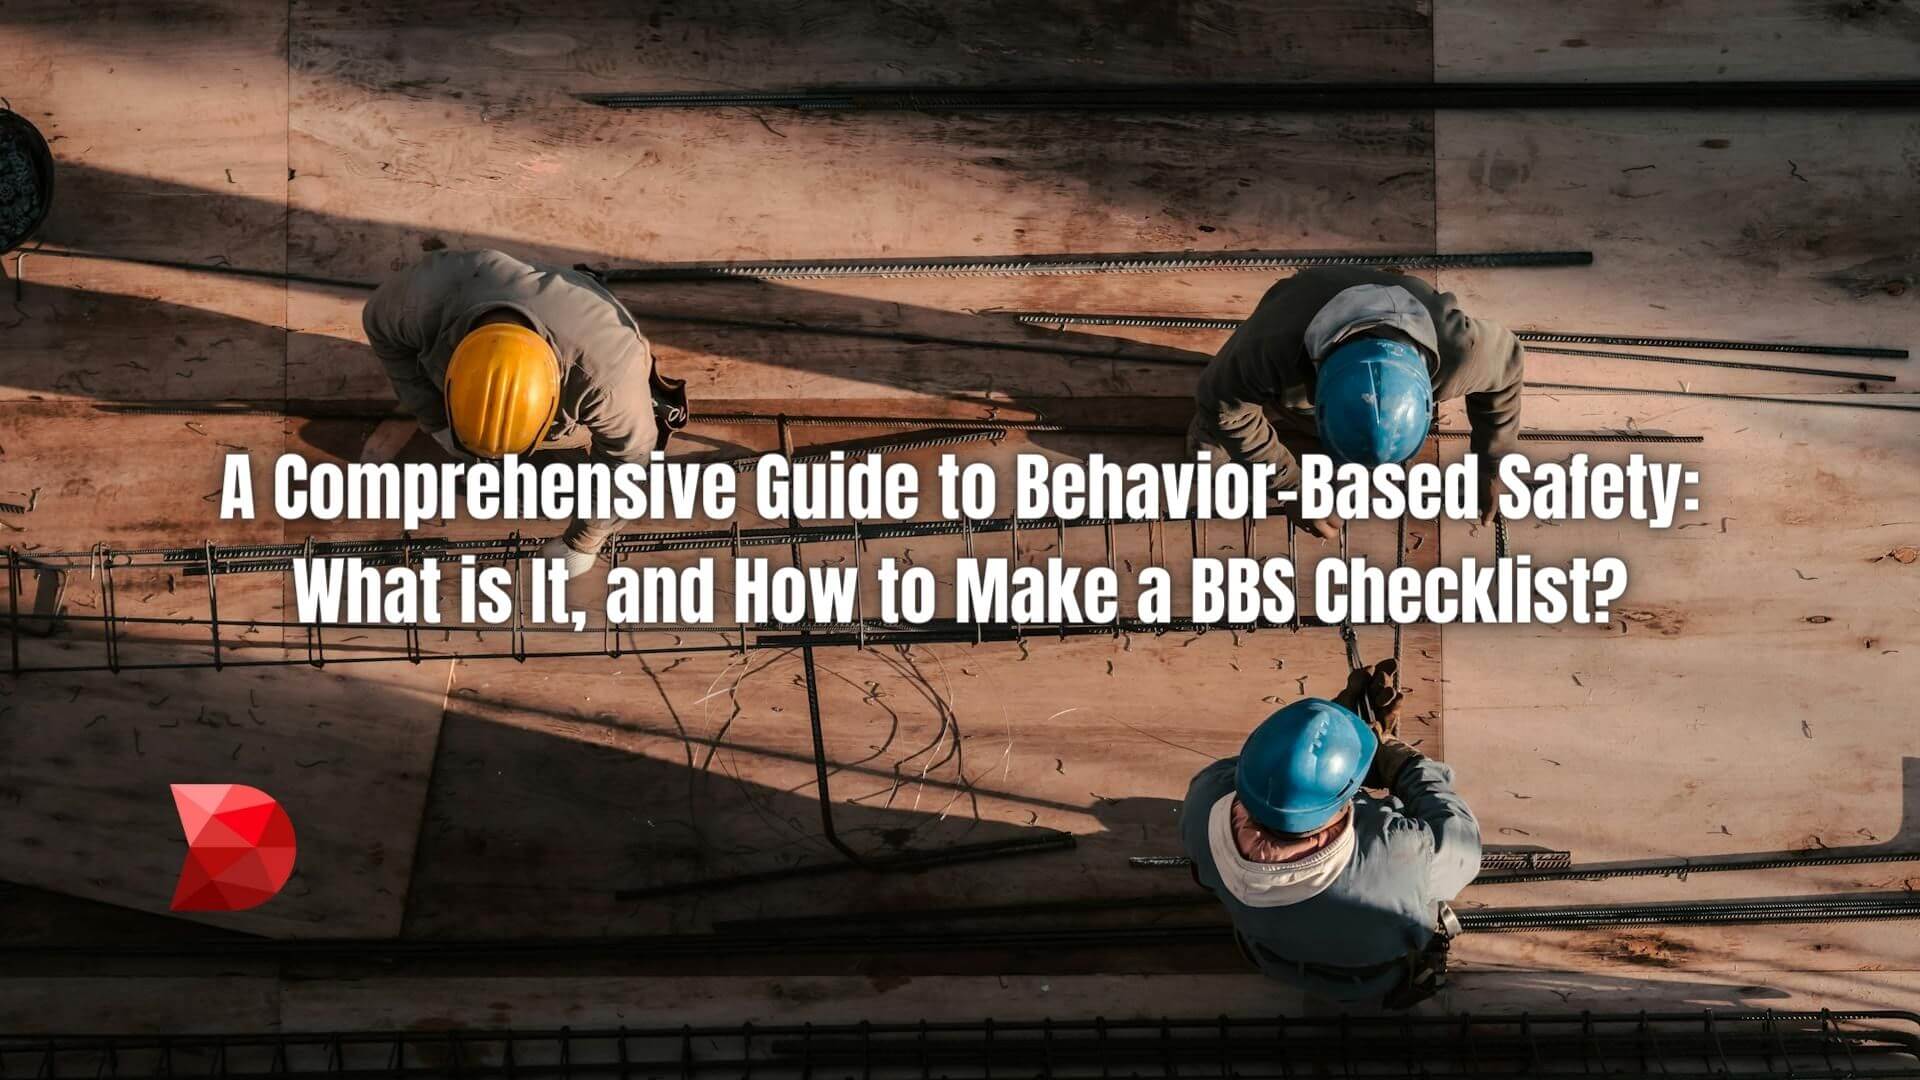 This article will talk about behavior-based safety checklists, why it's important, and how you can create one. Learn more!